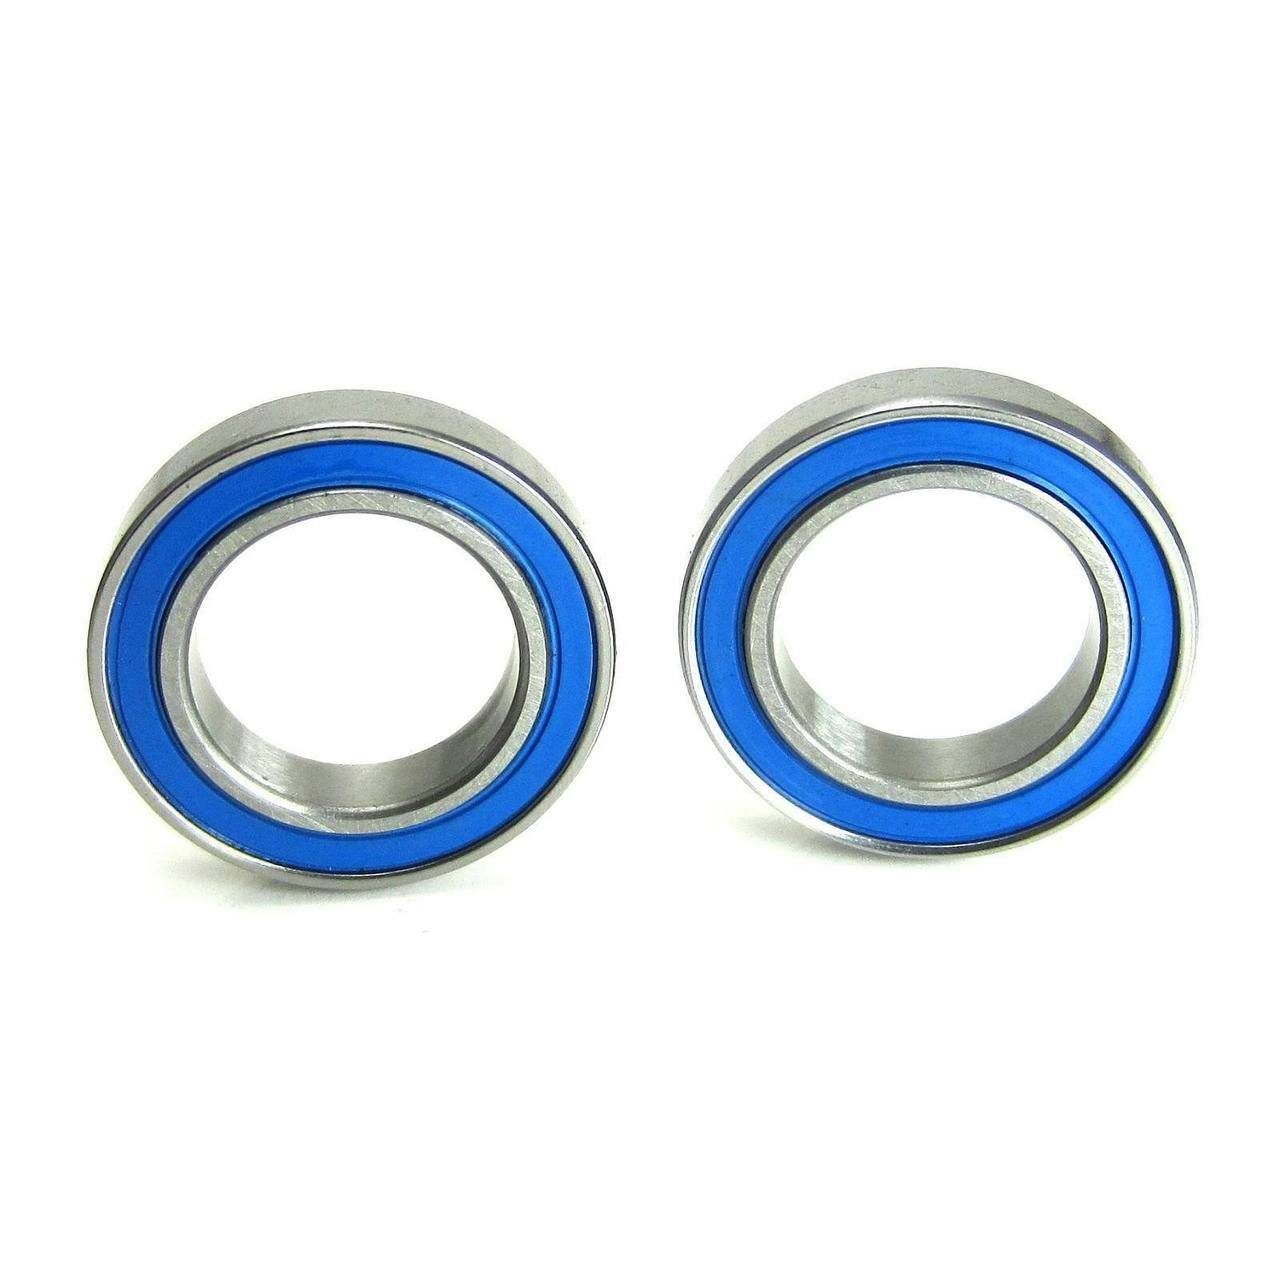 6802-2RS 15x24x5mm Precision High Speed RC Ball Bearing, Chrome Steel (GCr15) with Blue Rubber Seals ABEC-1 ABEC-3 ABEC-5